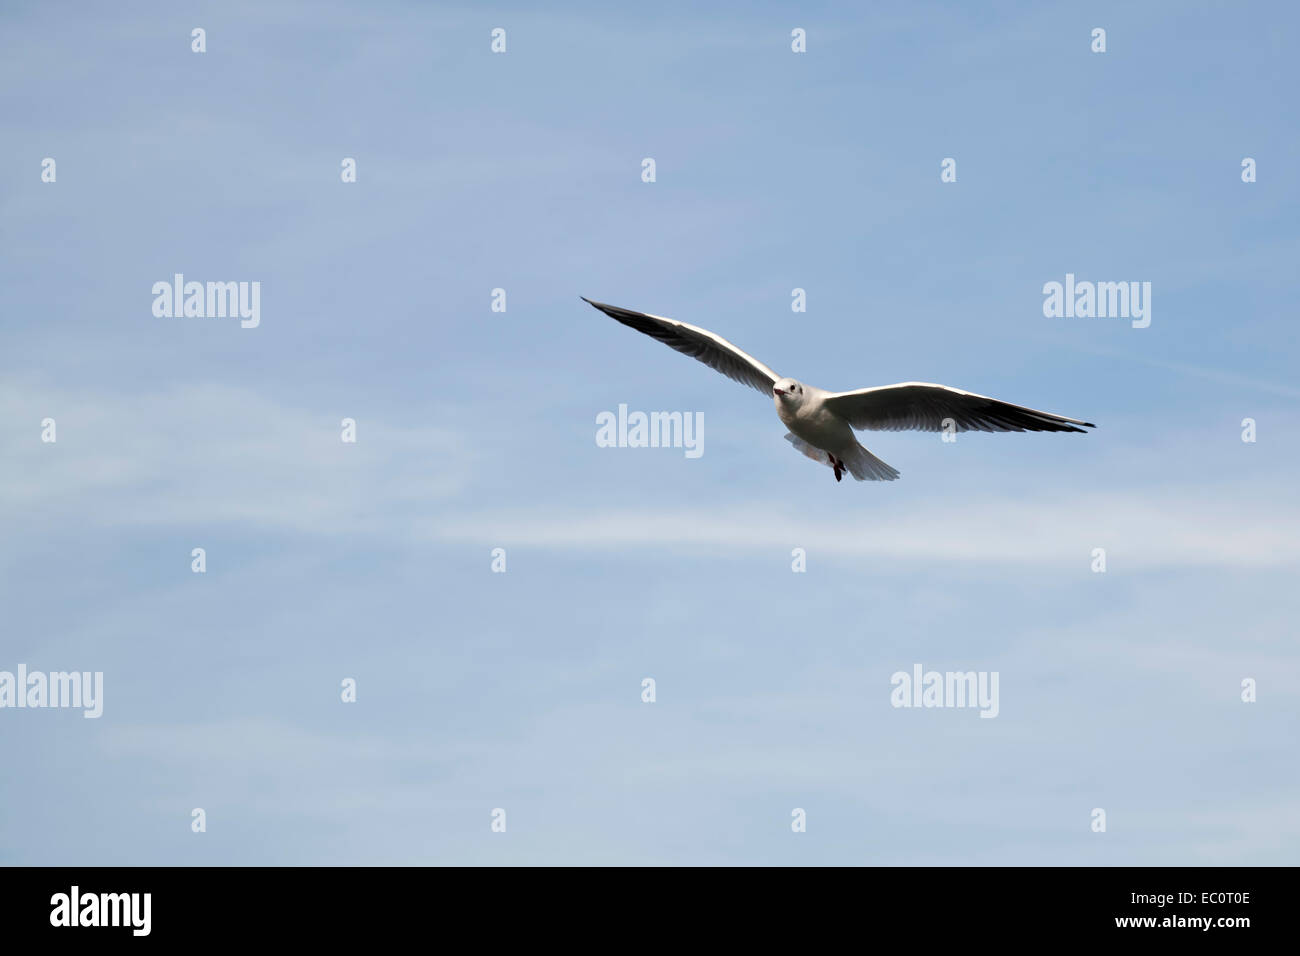 Seagull in flight with blue sky with copy space. Stock Photo